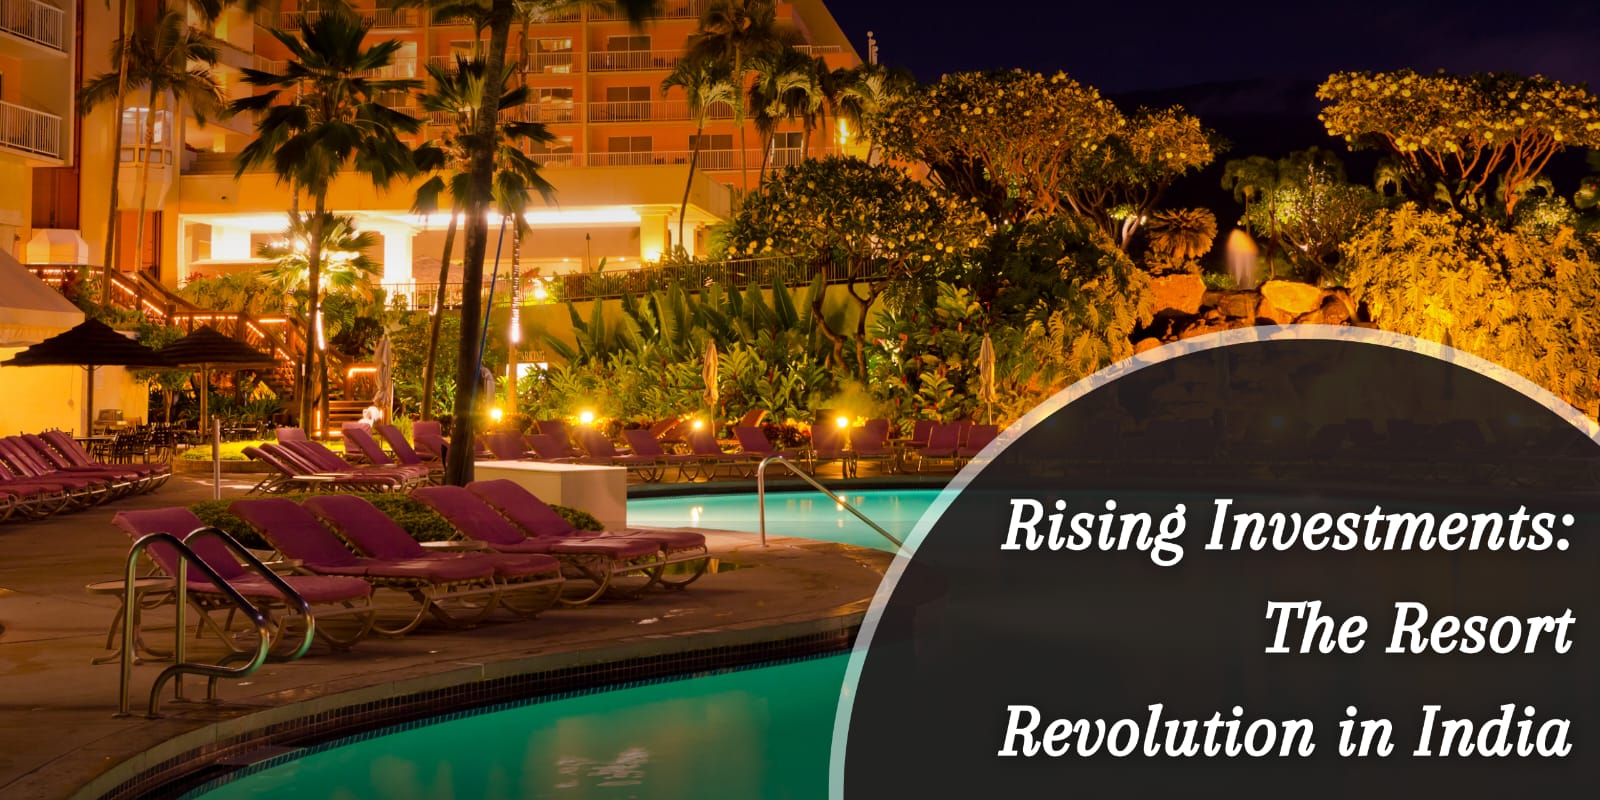 Elevating Investment in Hospitality Sector - Remarkable Growth in India